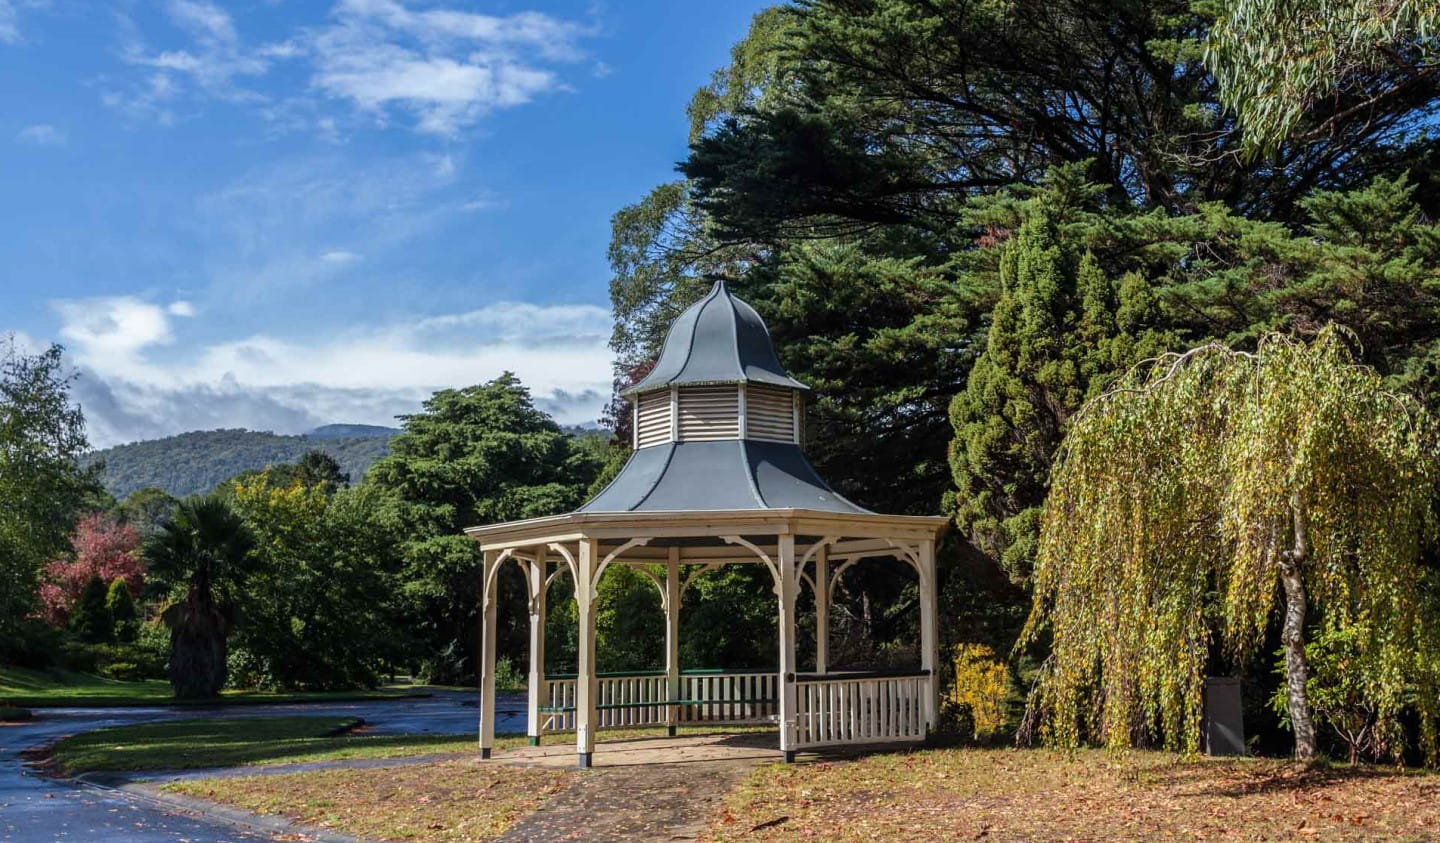 There are plenty of rotundas and picnic tables at Maroondah Reservoir Park.